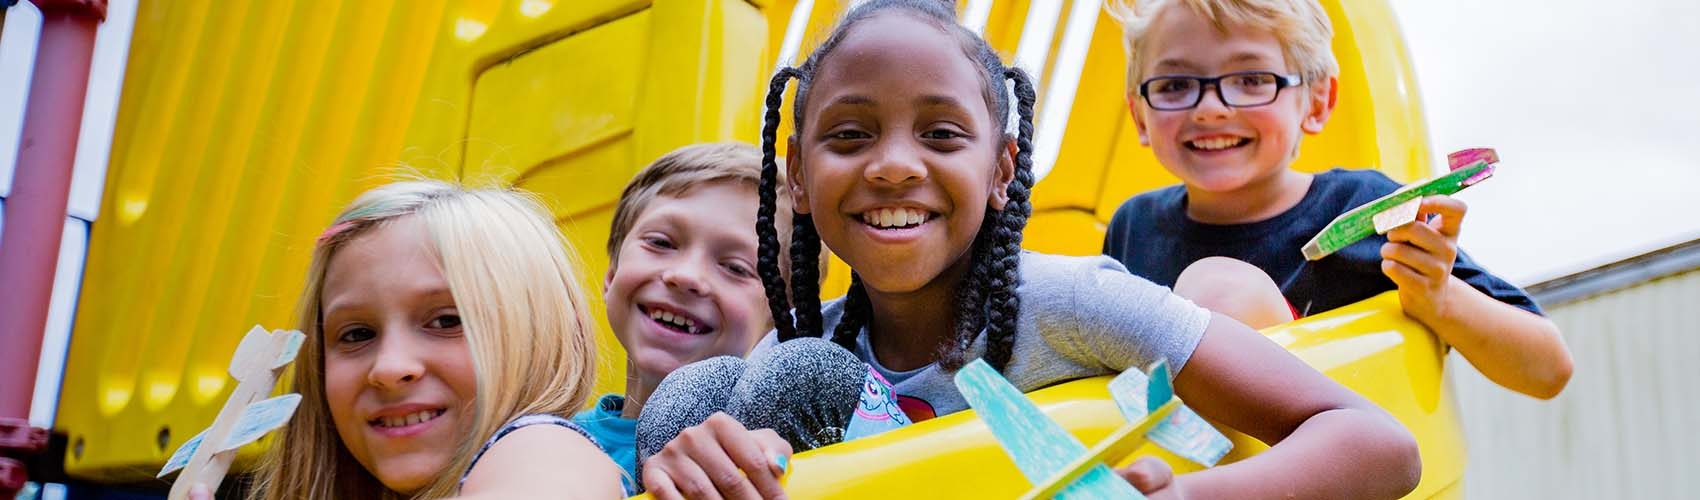 A group of children smile as they gather together on a yellow playground slide. 